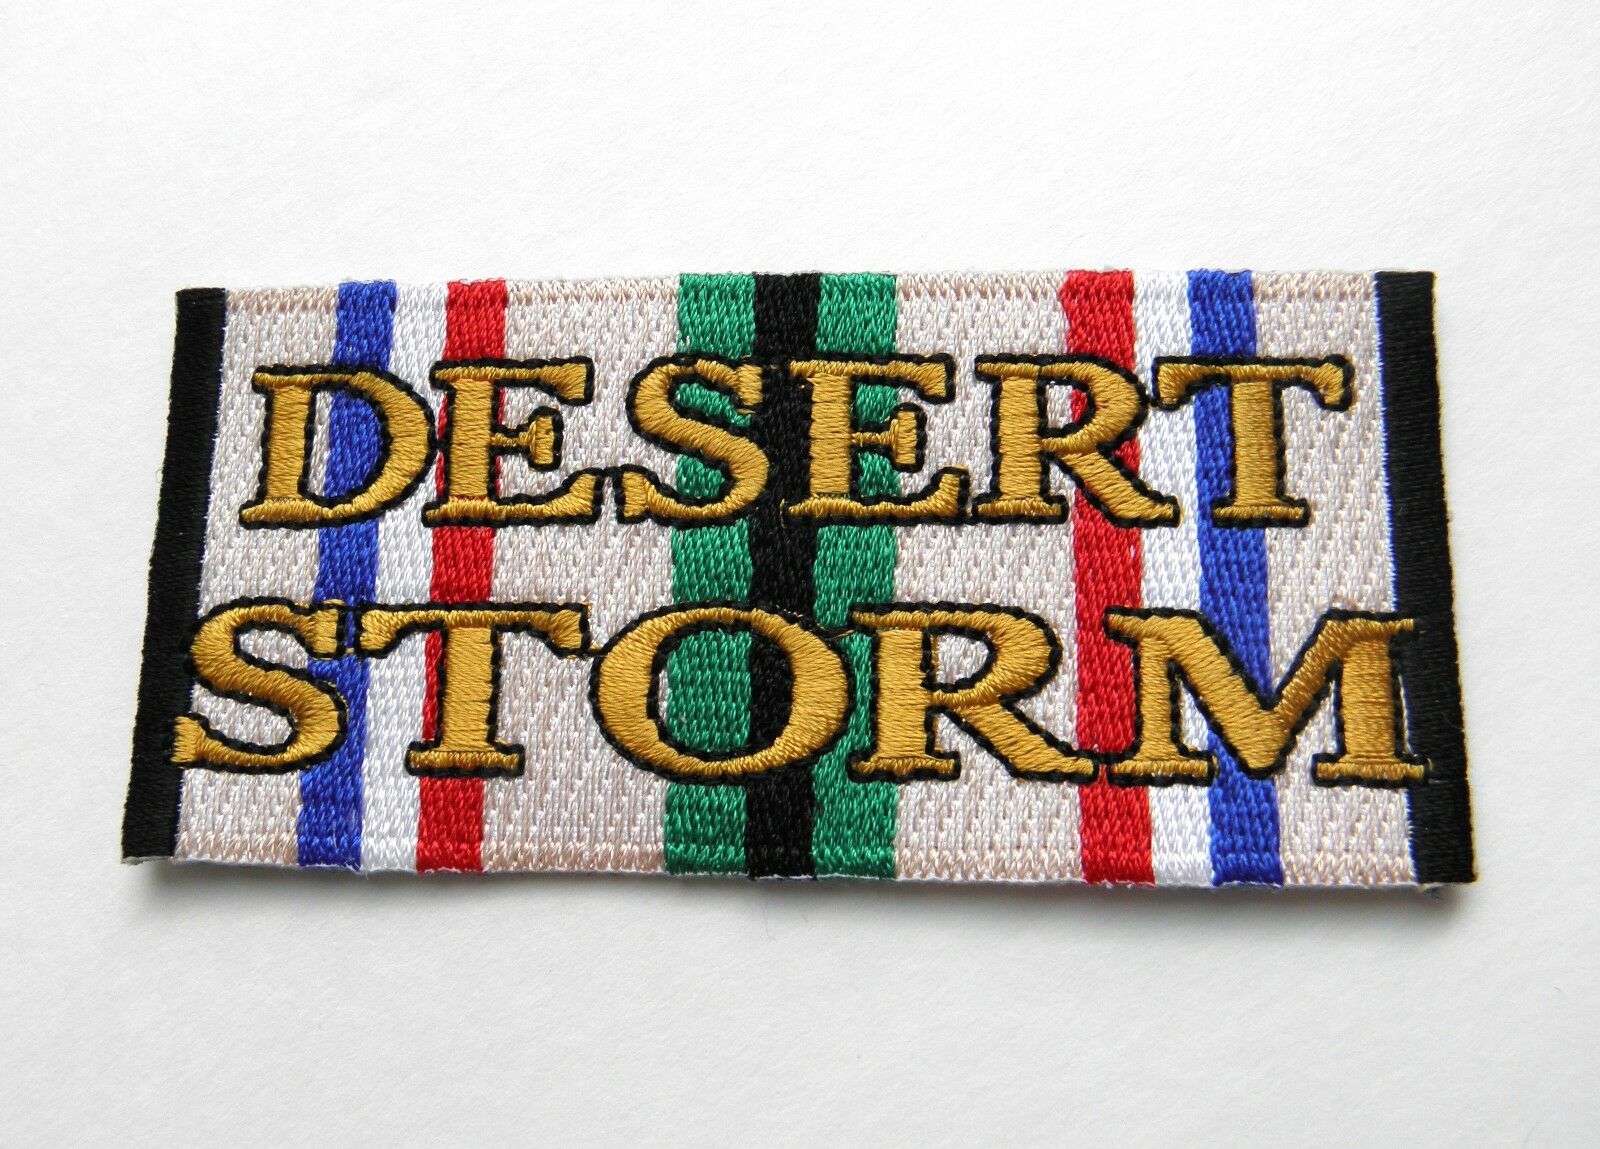 OPERATION DESERT STORM USN NAVY VETERAN EMBROIDERED PATCH 4 X 2 INCHES 